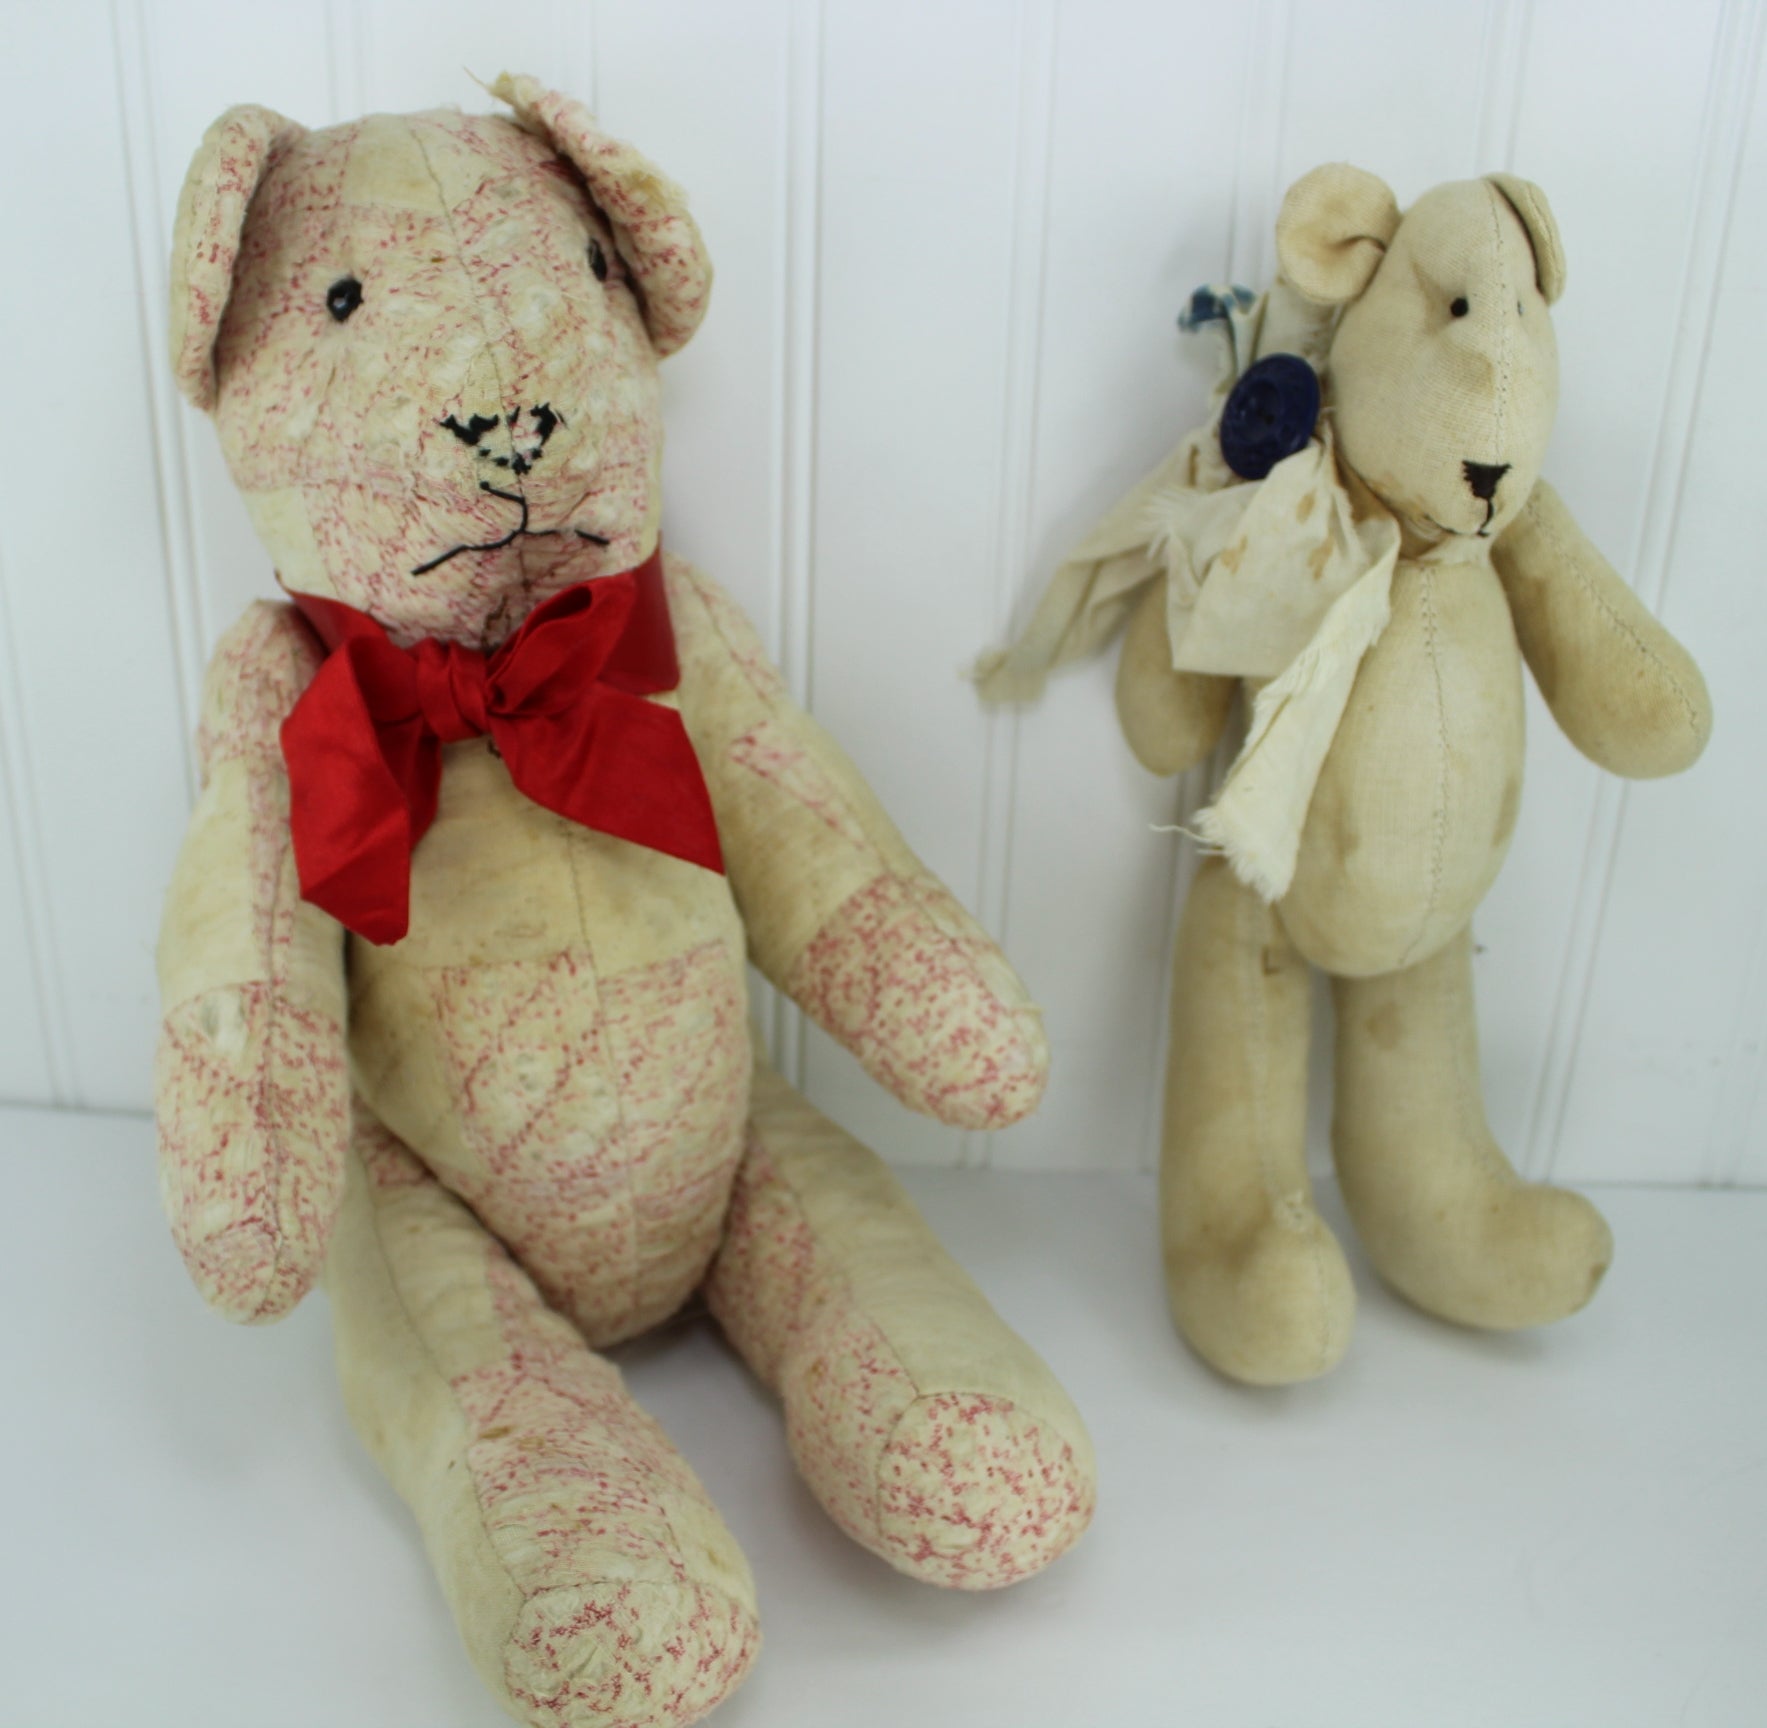 Vintage Hand Crafted Primitive Teddy Bears Old Quilted & Heavy Cotton Both Artisan Marked cotton fabric homemade bears